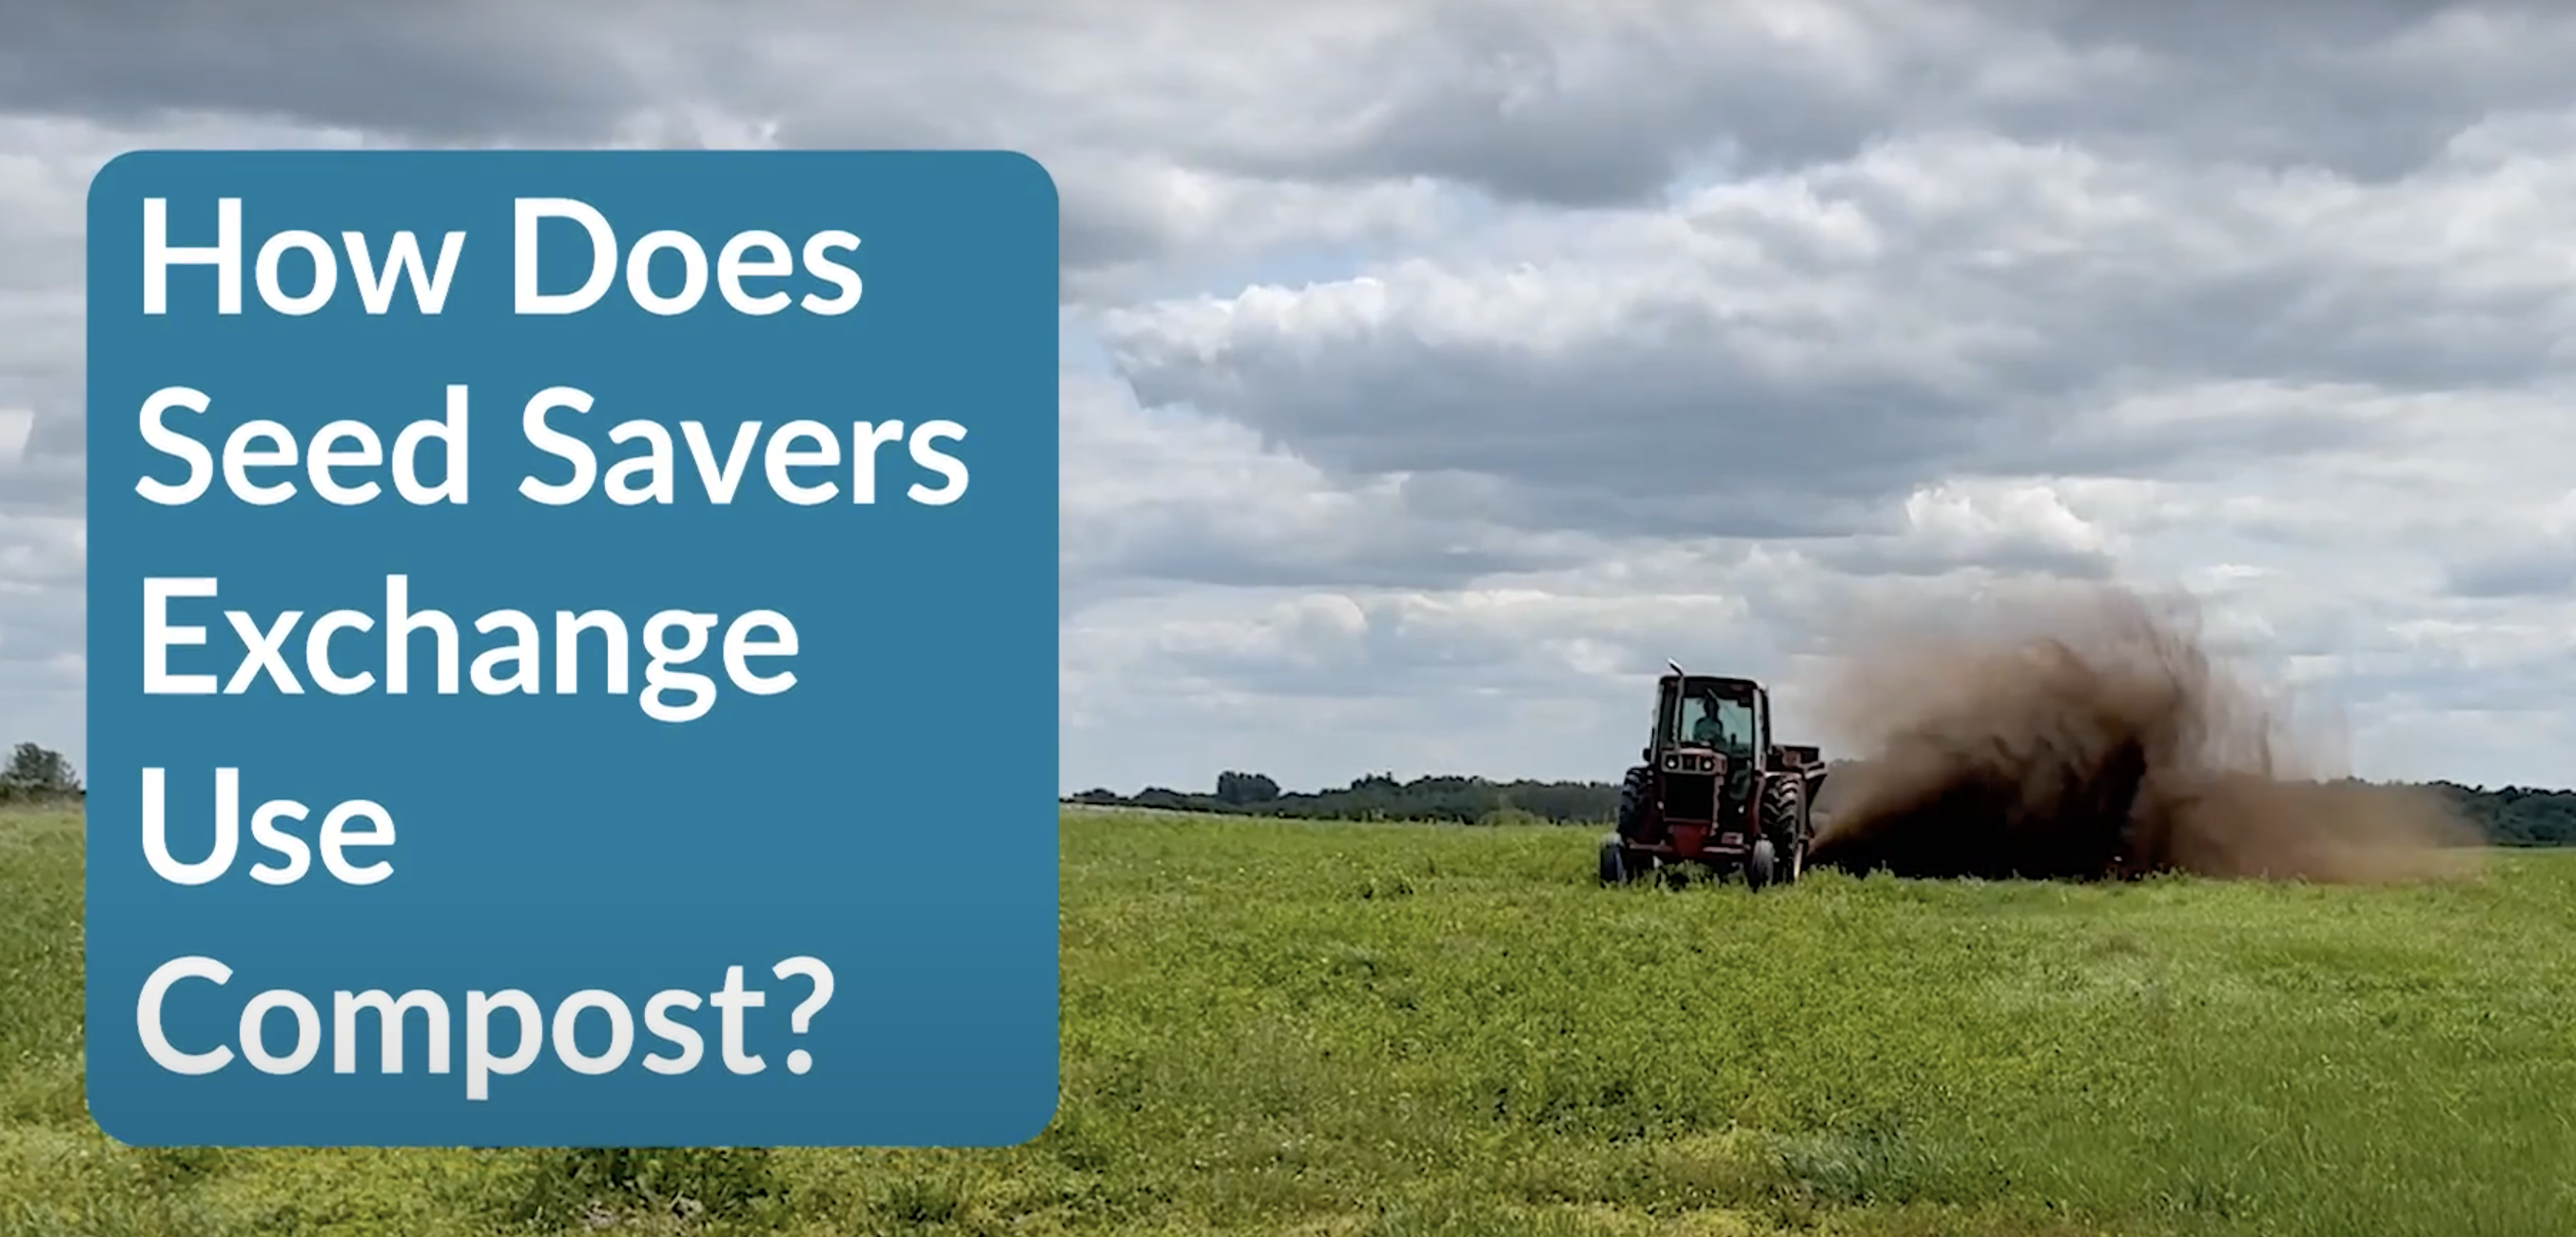 A tractor in a field, with text overlay saying "How Does Seed Savers Exchange Use Compost?"